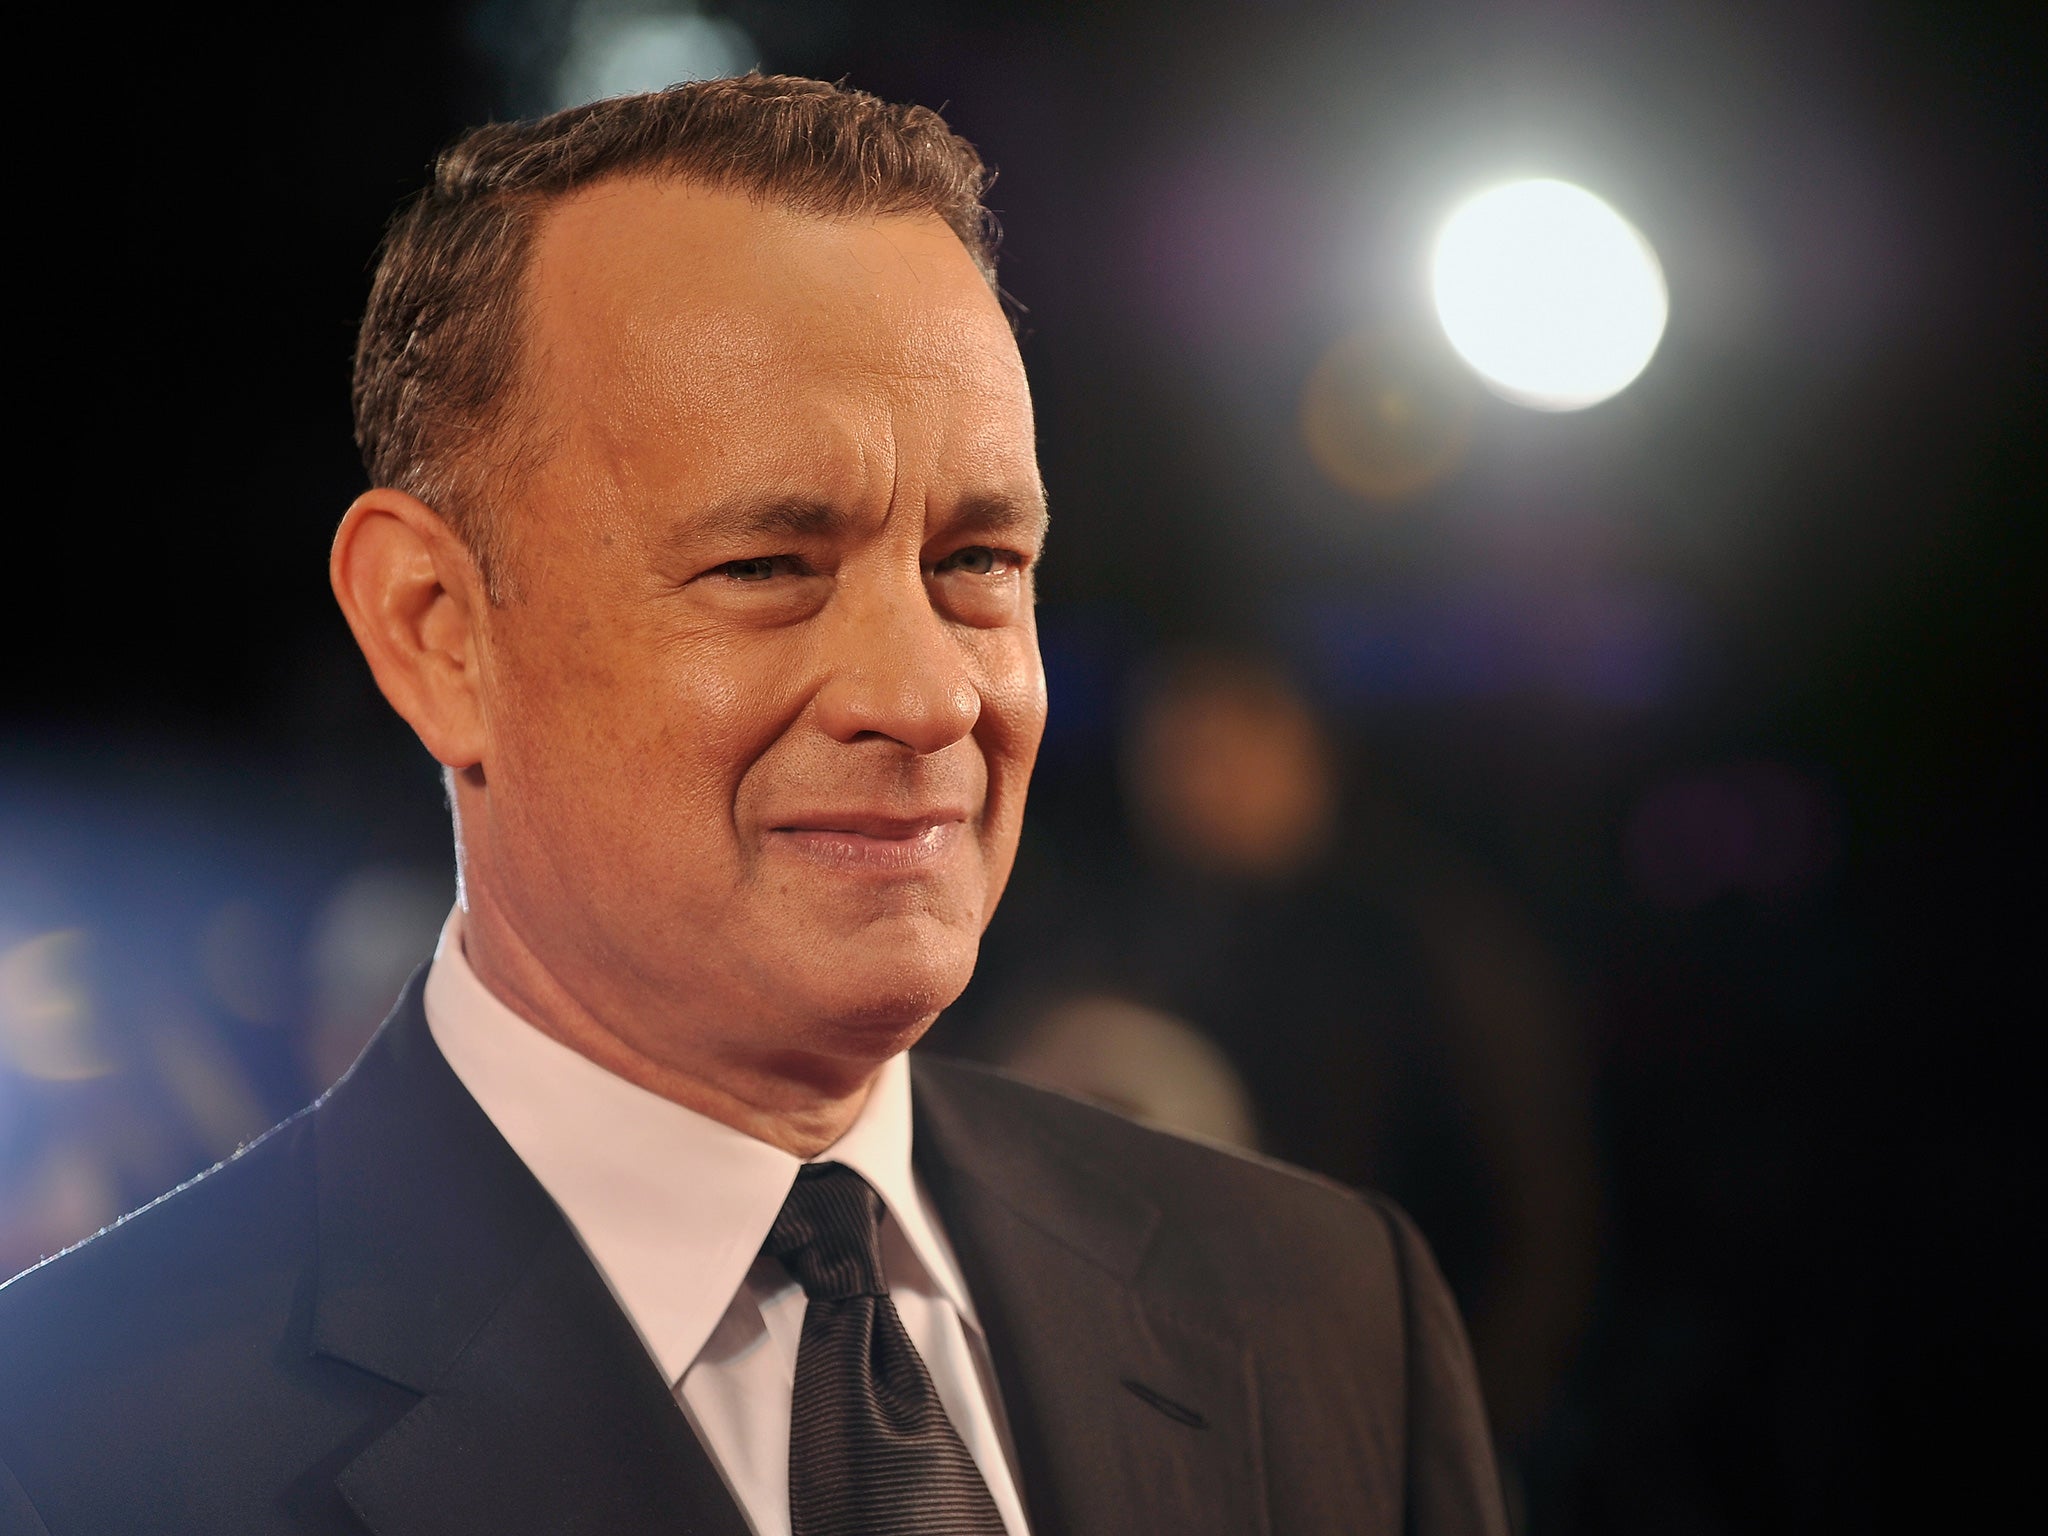 Tom Hanks has played heroes in several successful films and is lined up to star as Hudson River pilot Captain Sullenberger